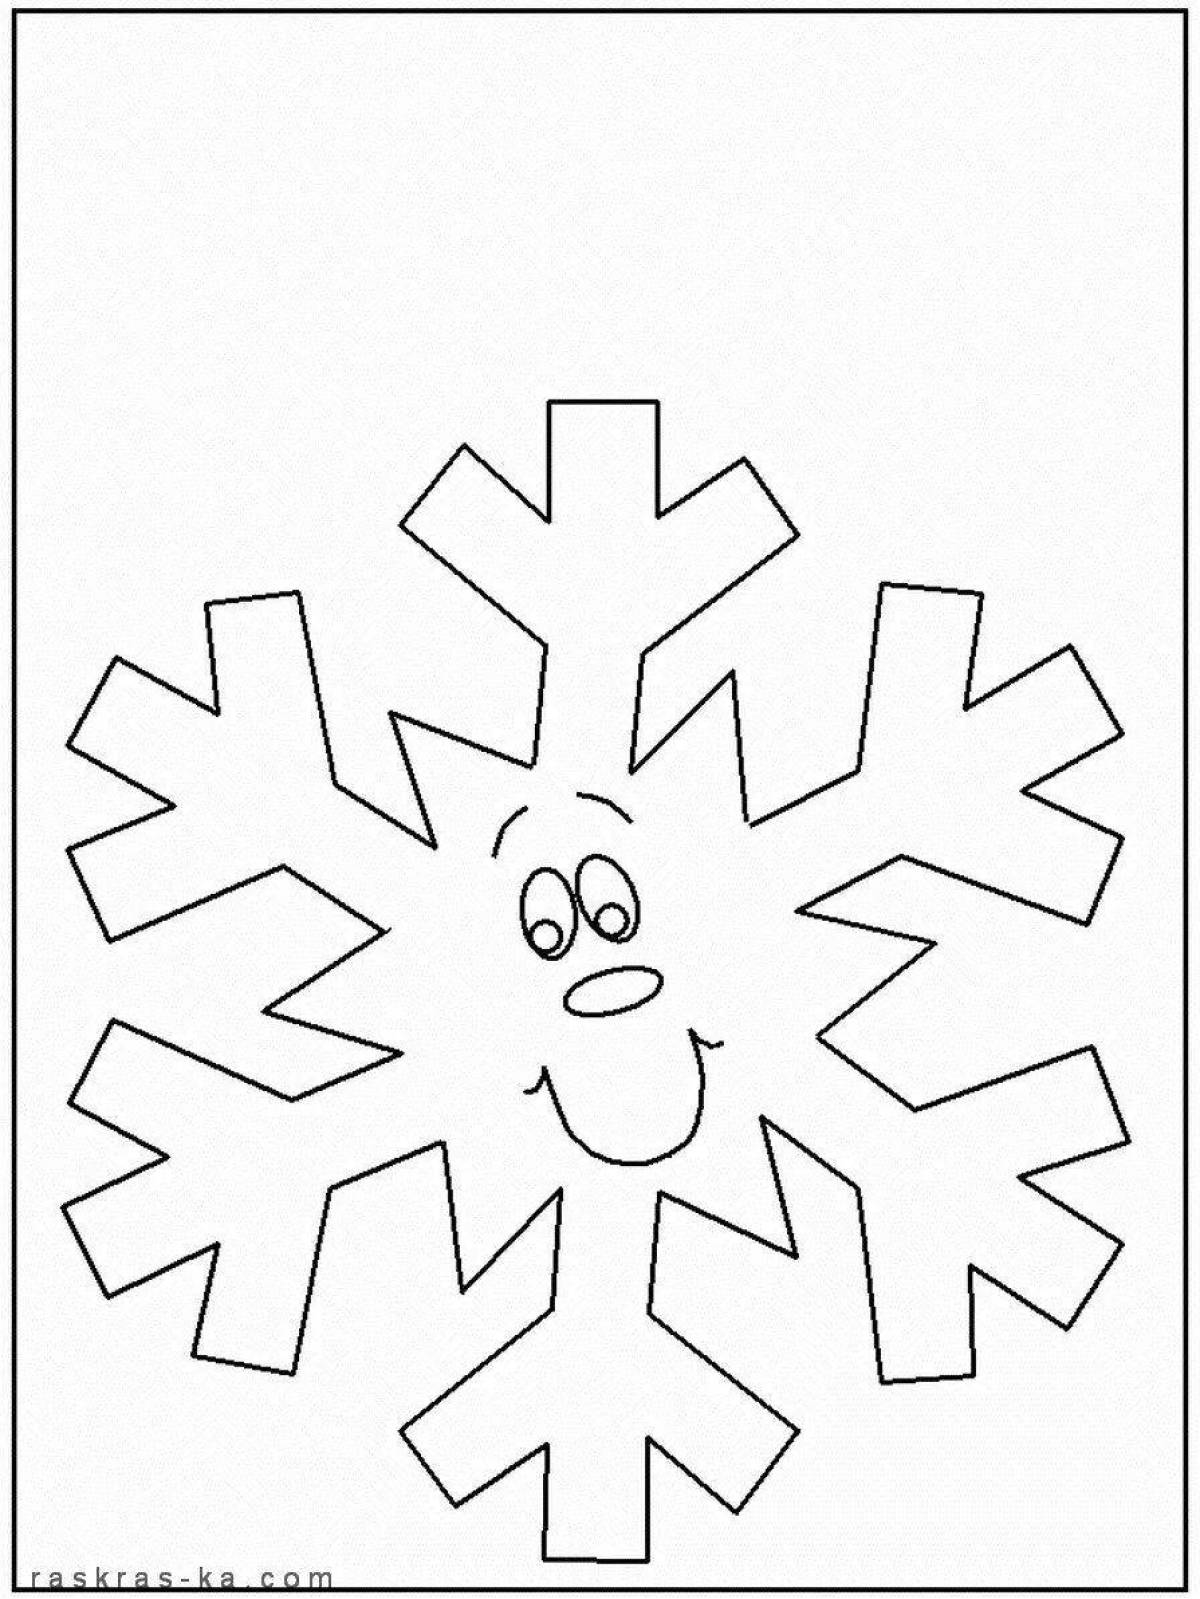 Magic snowflake coloring book for kids 3-4 years old